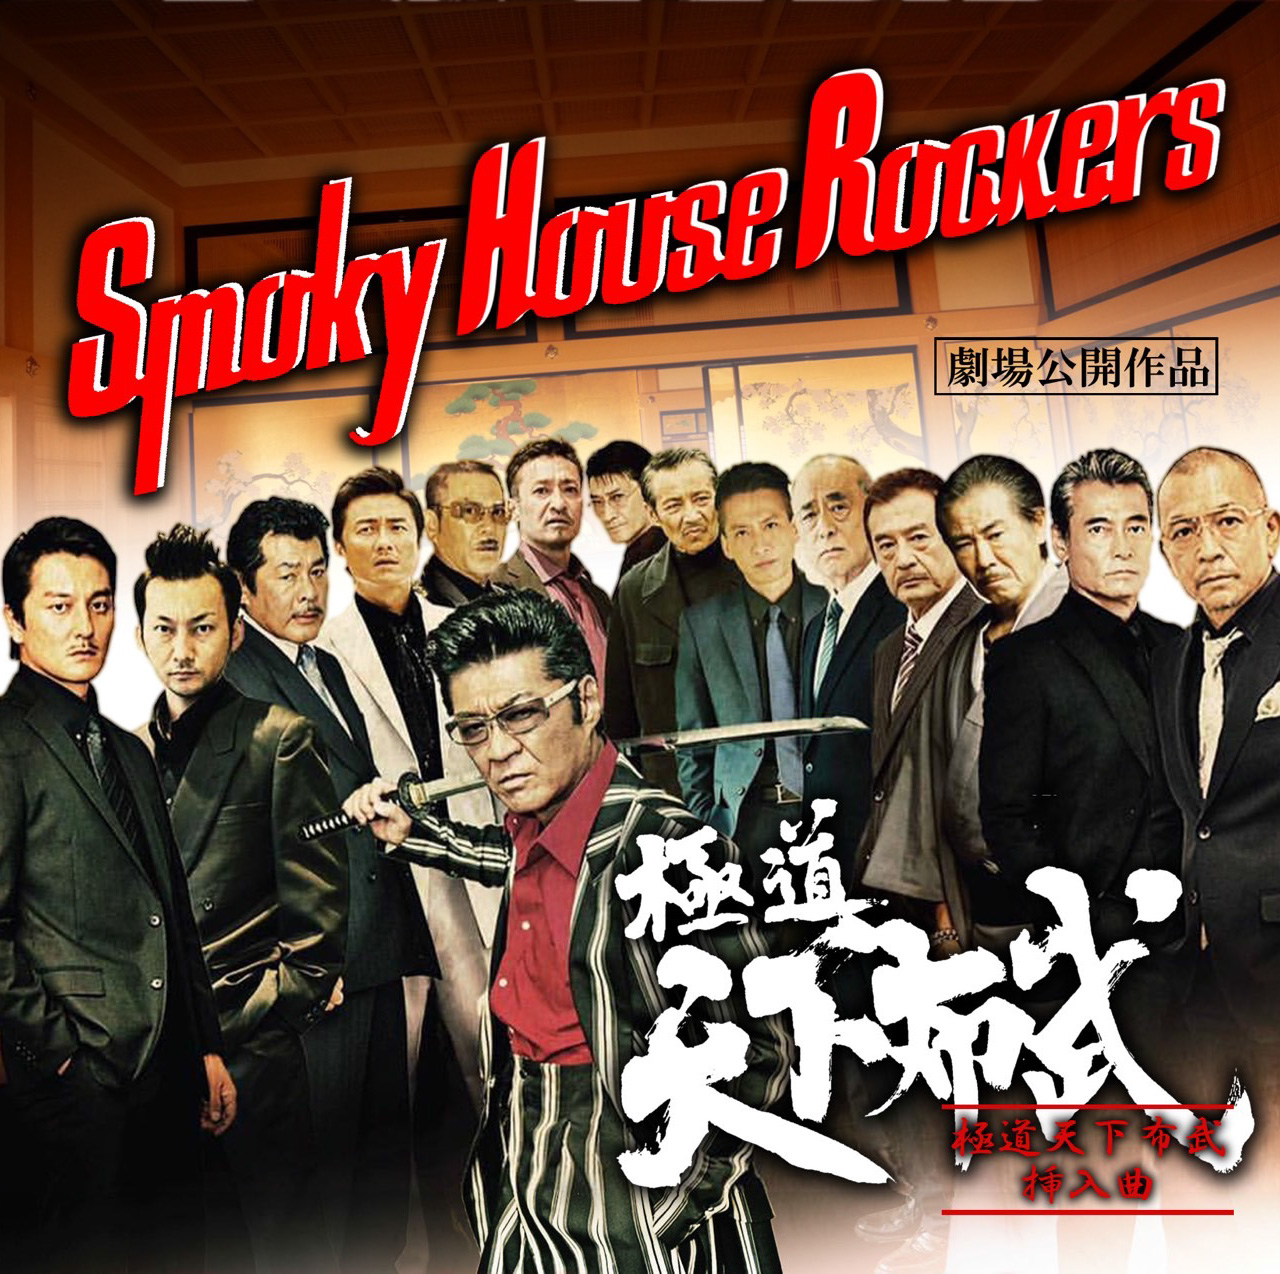 SMOKY HOUSE ROCKERS OFFICIAL SITE